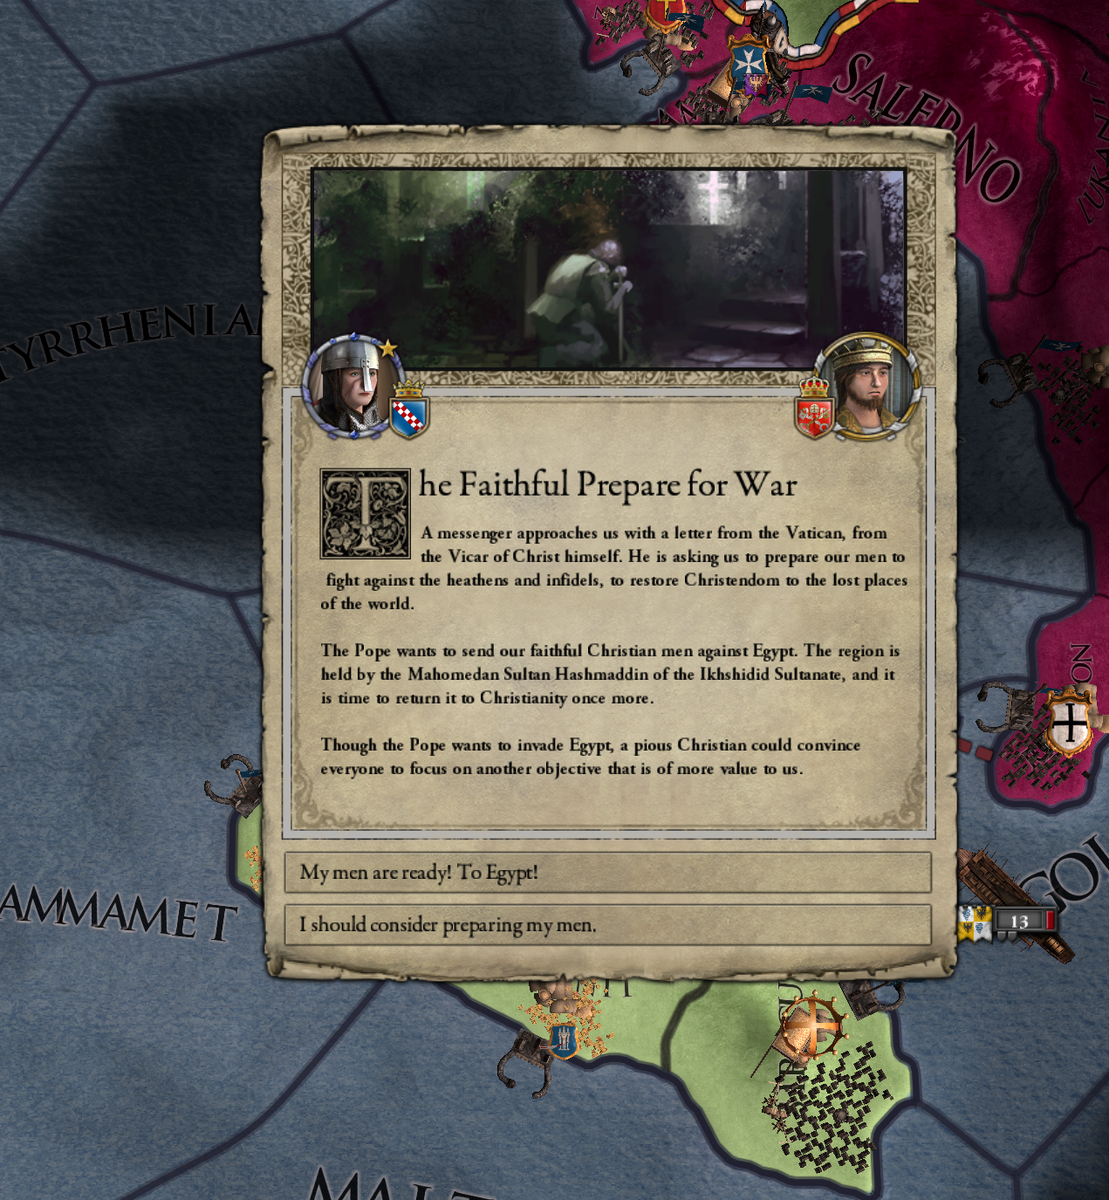 NOT NOW POPE SILVESTER. NOT NOW.Bloody Popes and their crusades.We'll be sitting this one out. Sicily will contribute cash if we have to, but we're not dying in the sands of Egypt with the Fatimids AND the Byzantines eyeing up our lands.